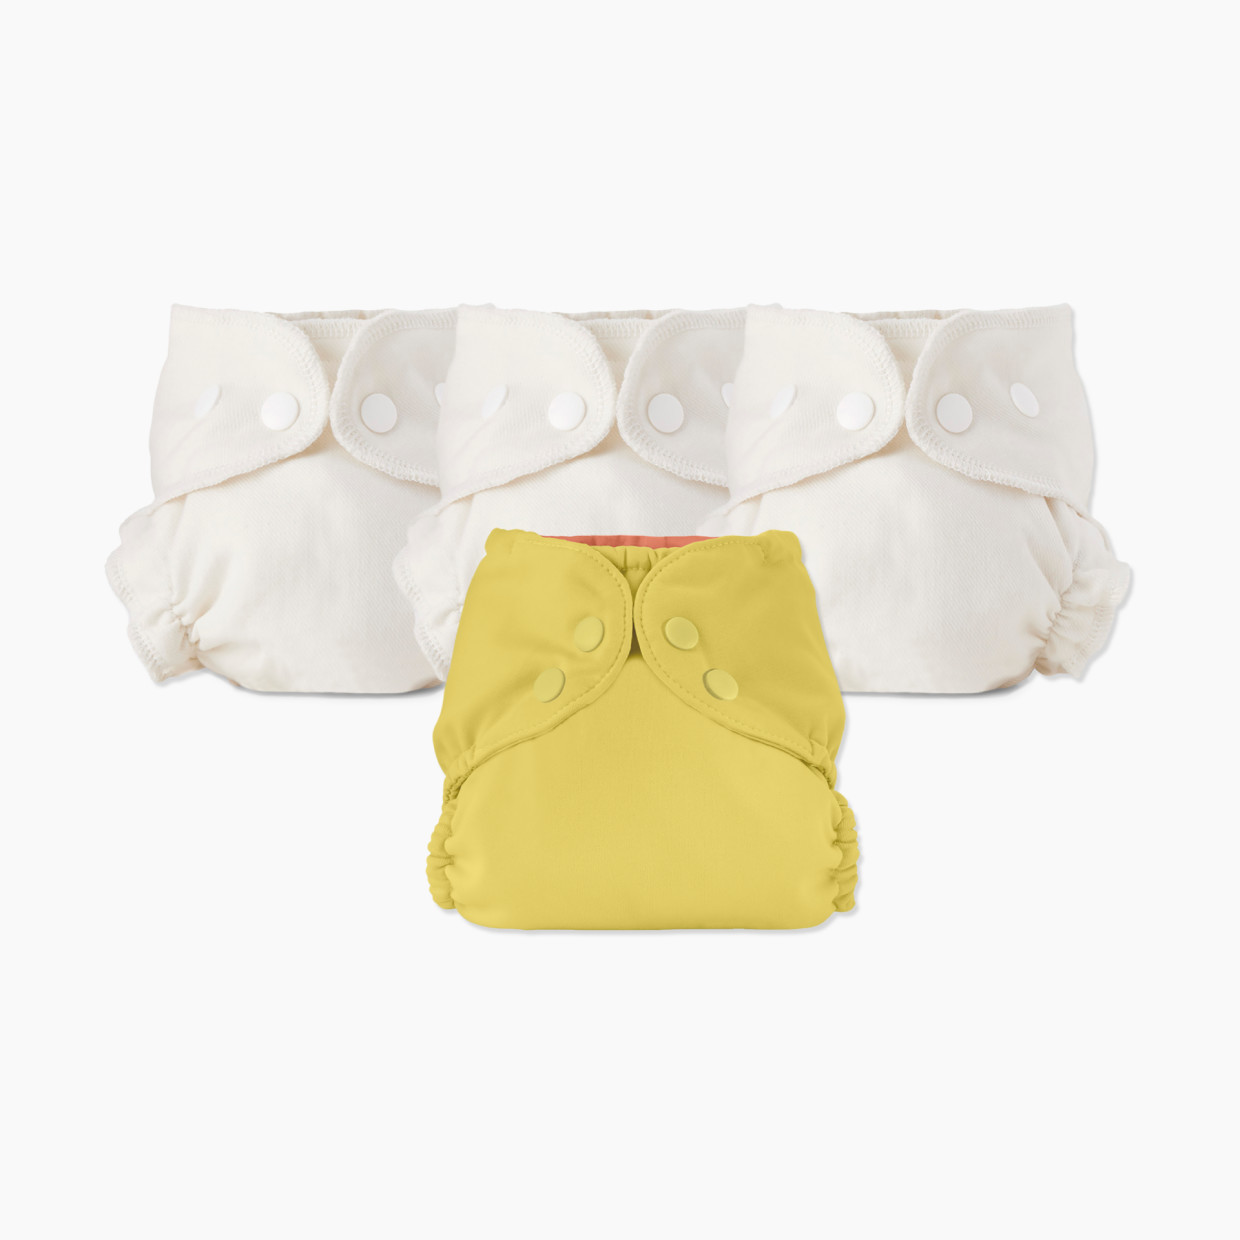 Esembly Blowout Proof Cloth Diaper Bundle - Chamomile, Size 1 (7-17lbs).